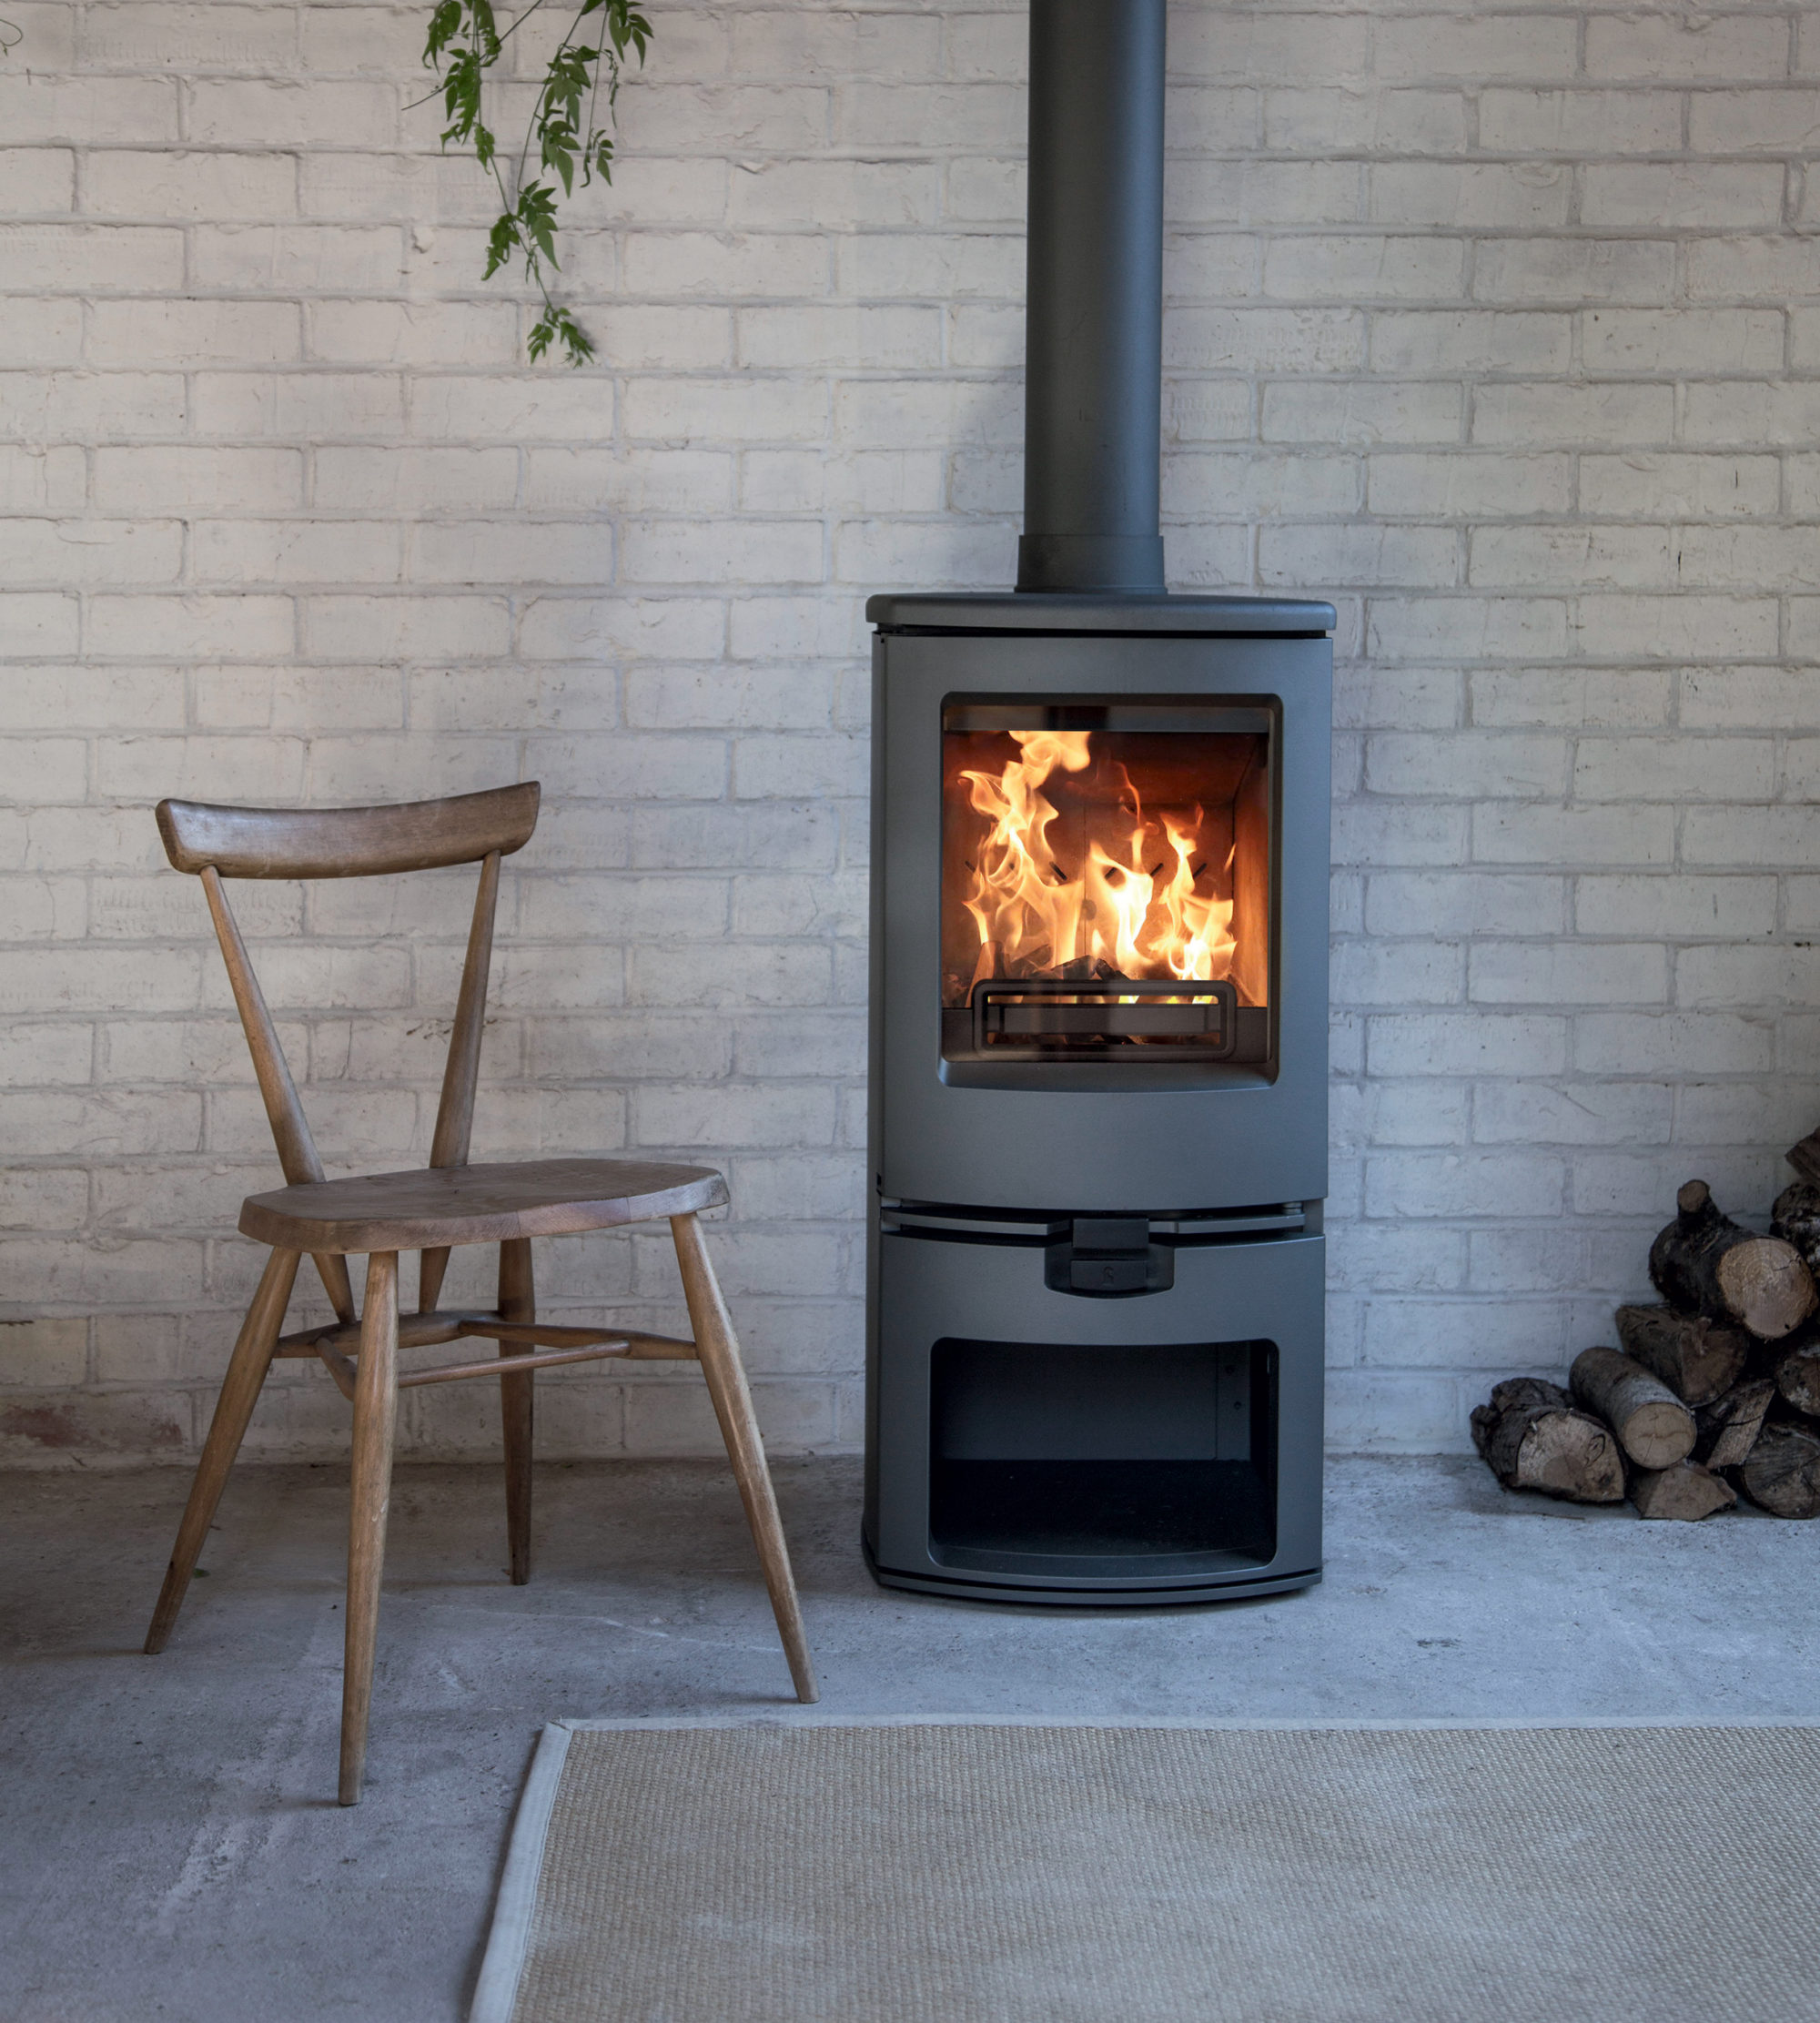 How much will my woodburning stove cost to install?